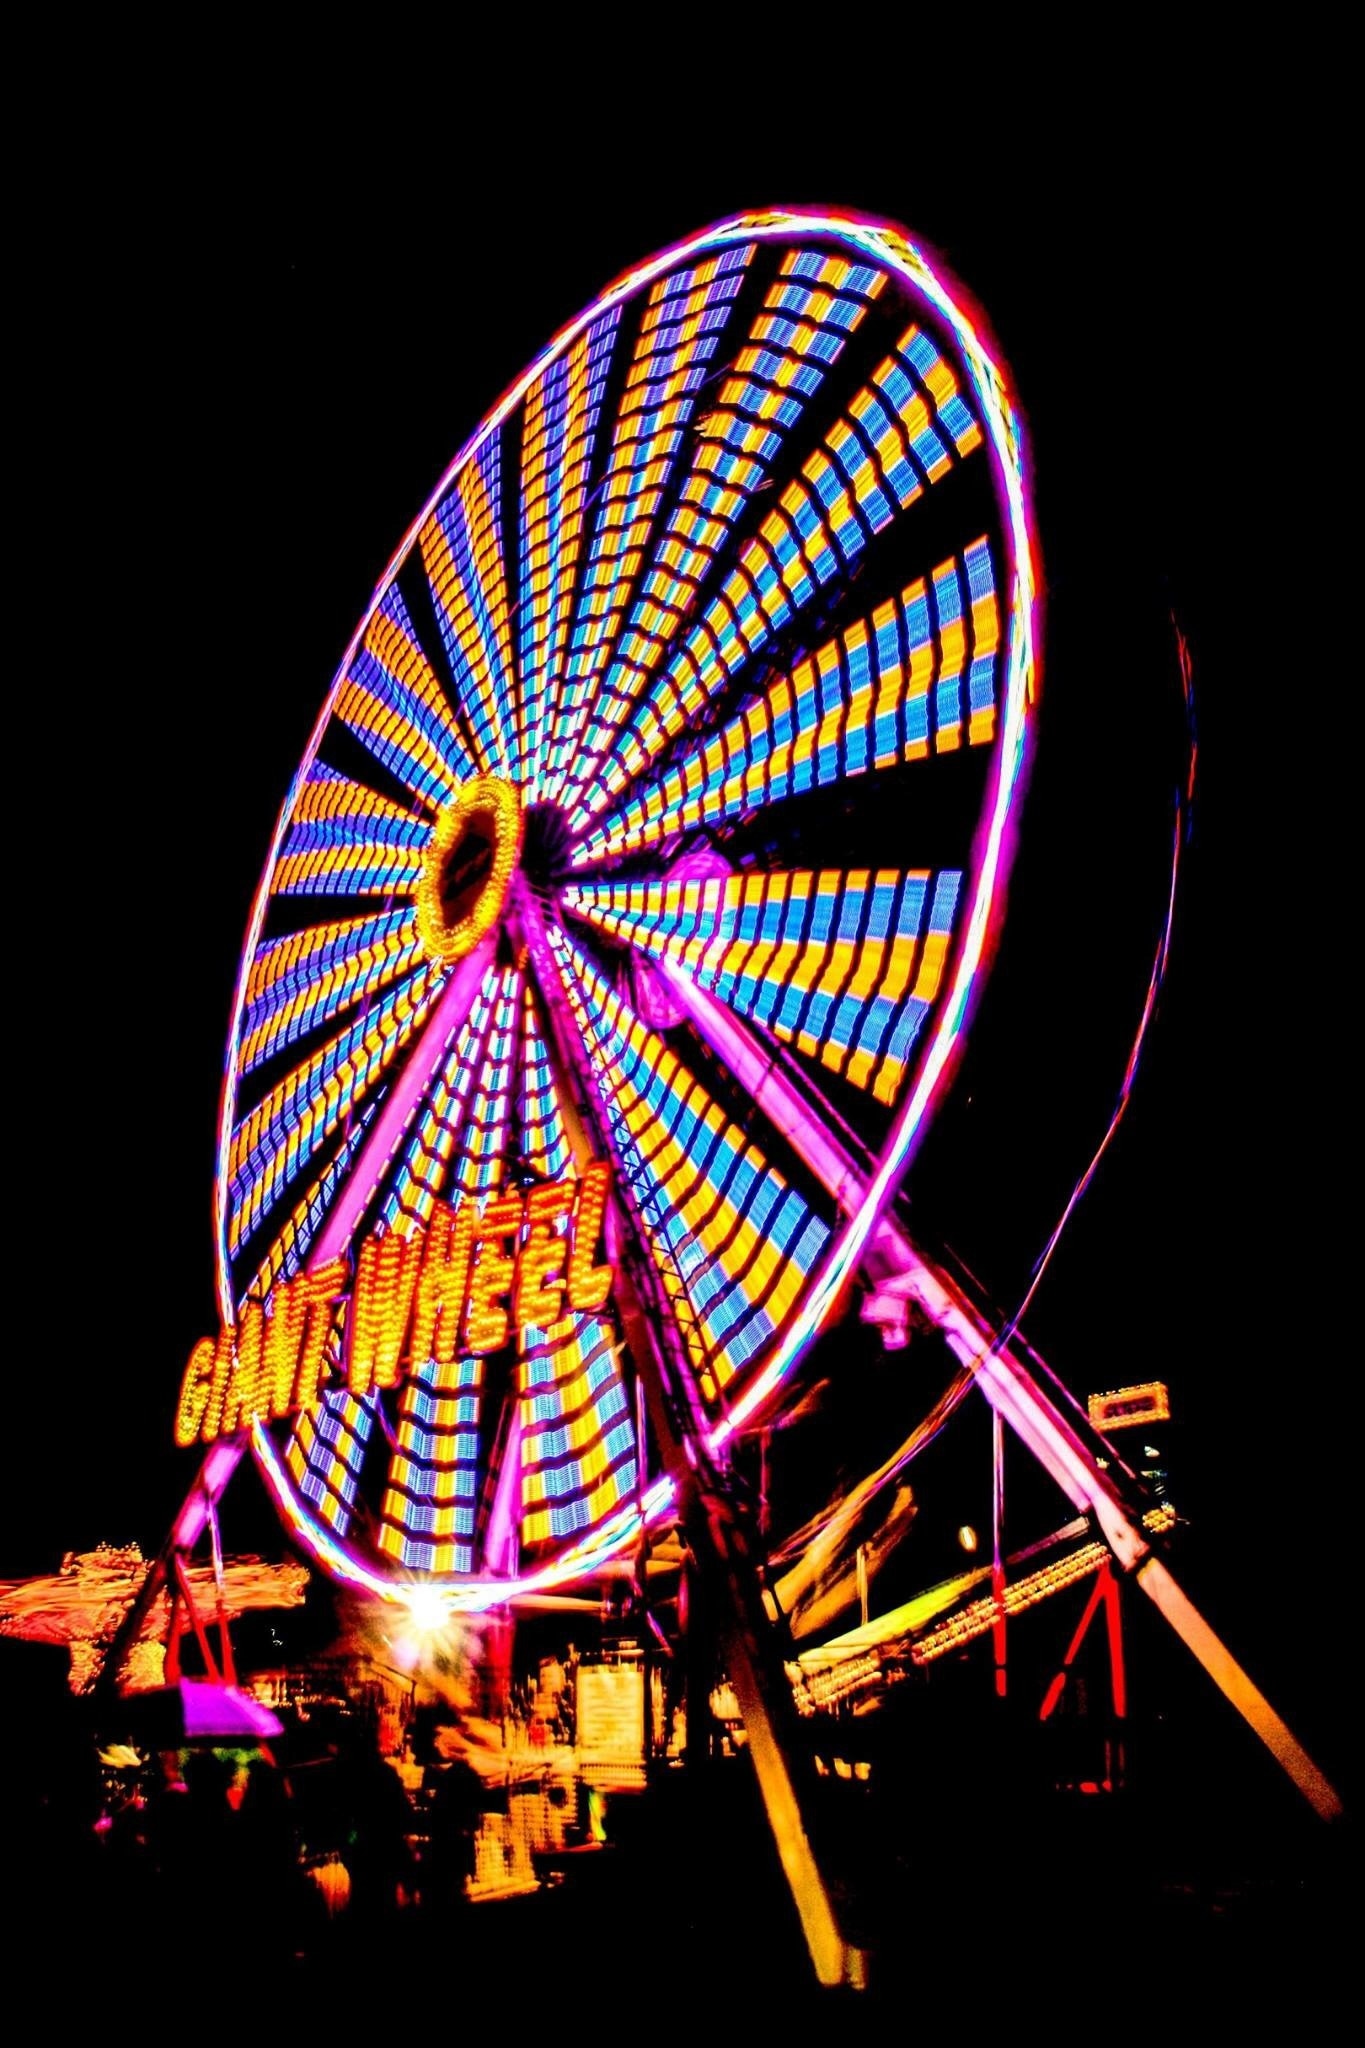 First attempt at taking a photograph of a moving Ferris Wheel at night! Had a blast at the Temecula Valley Fair.
#nightphotography #ferriswheel #fair